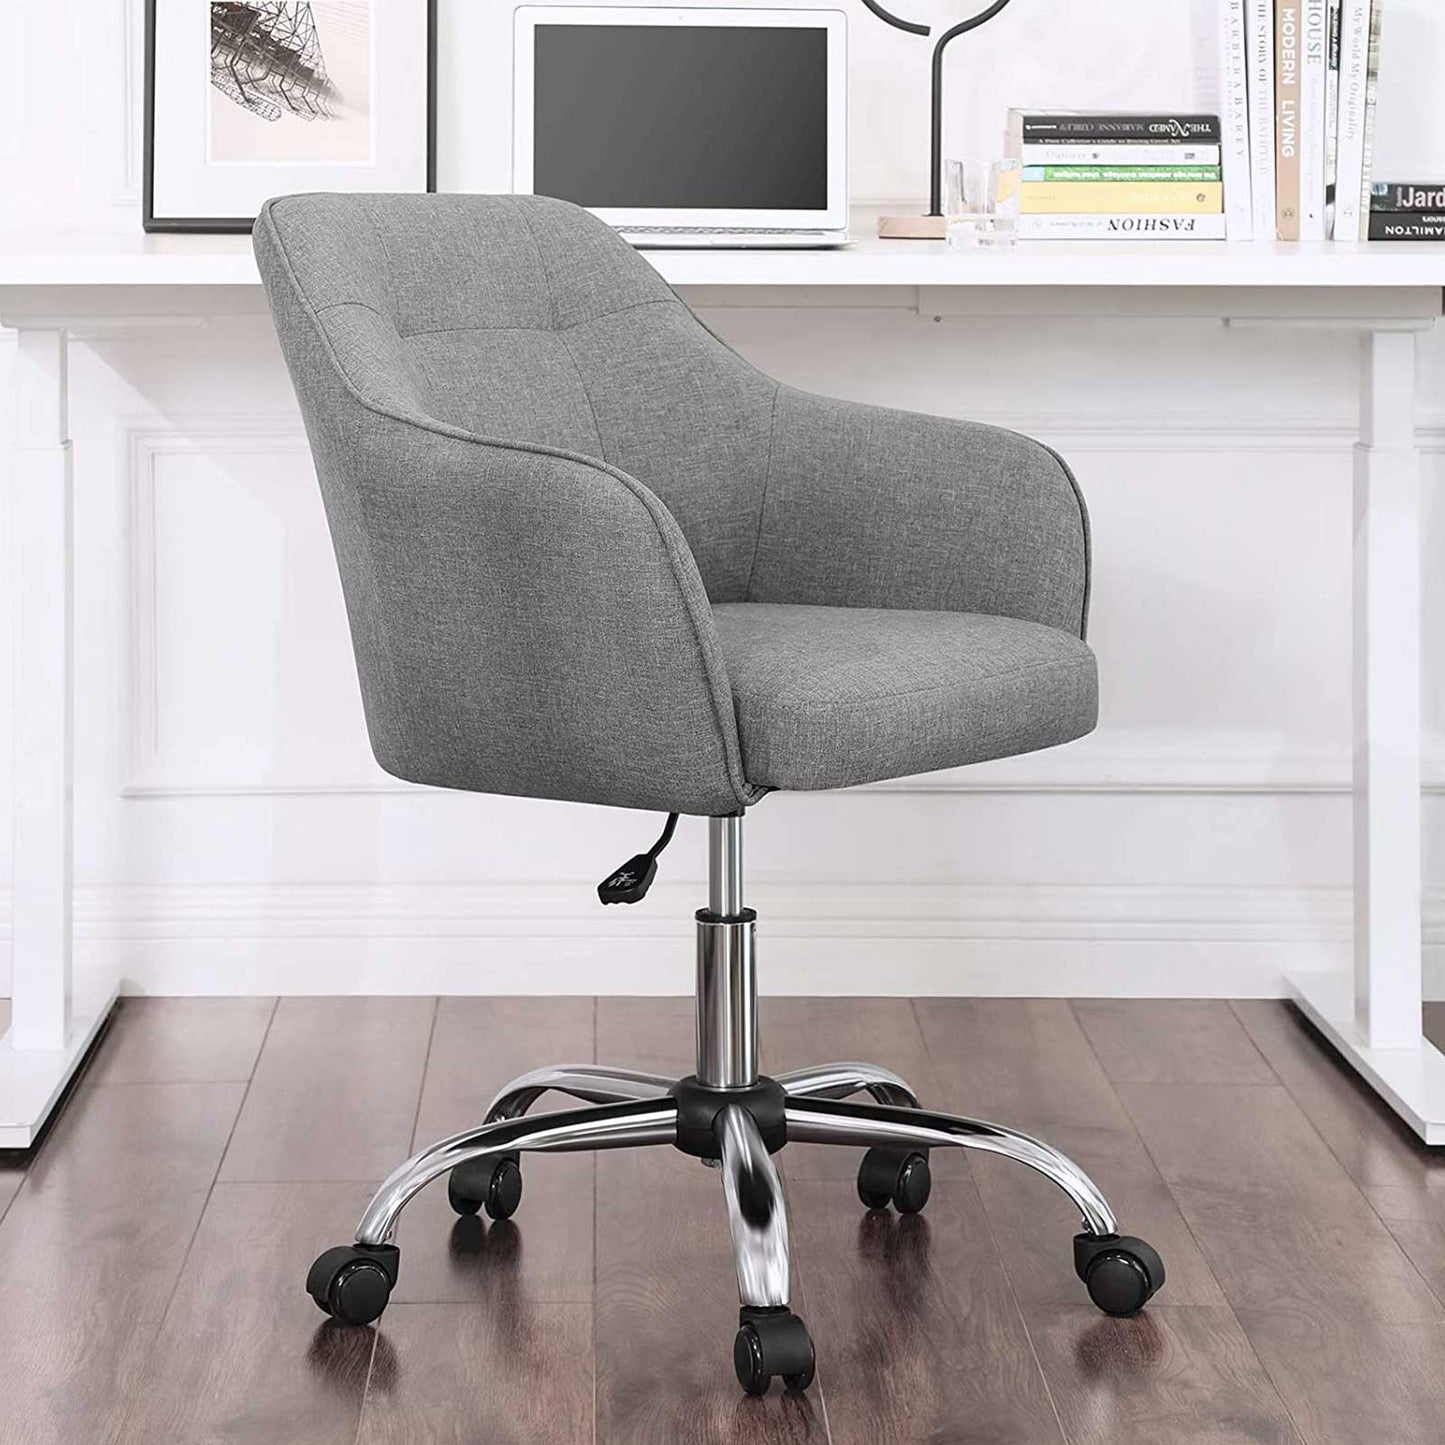 Height-adjustable office chair with steel frame